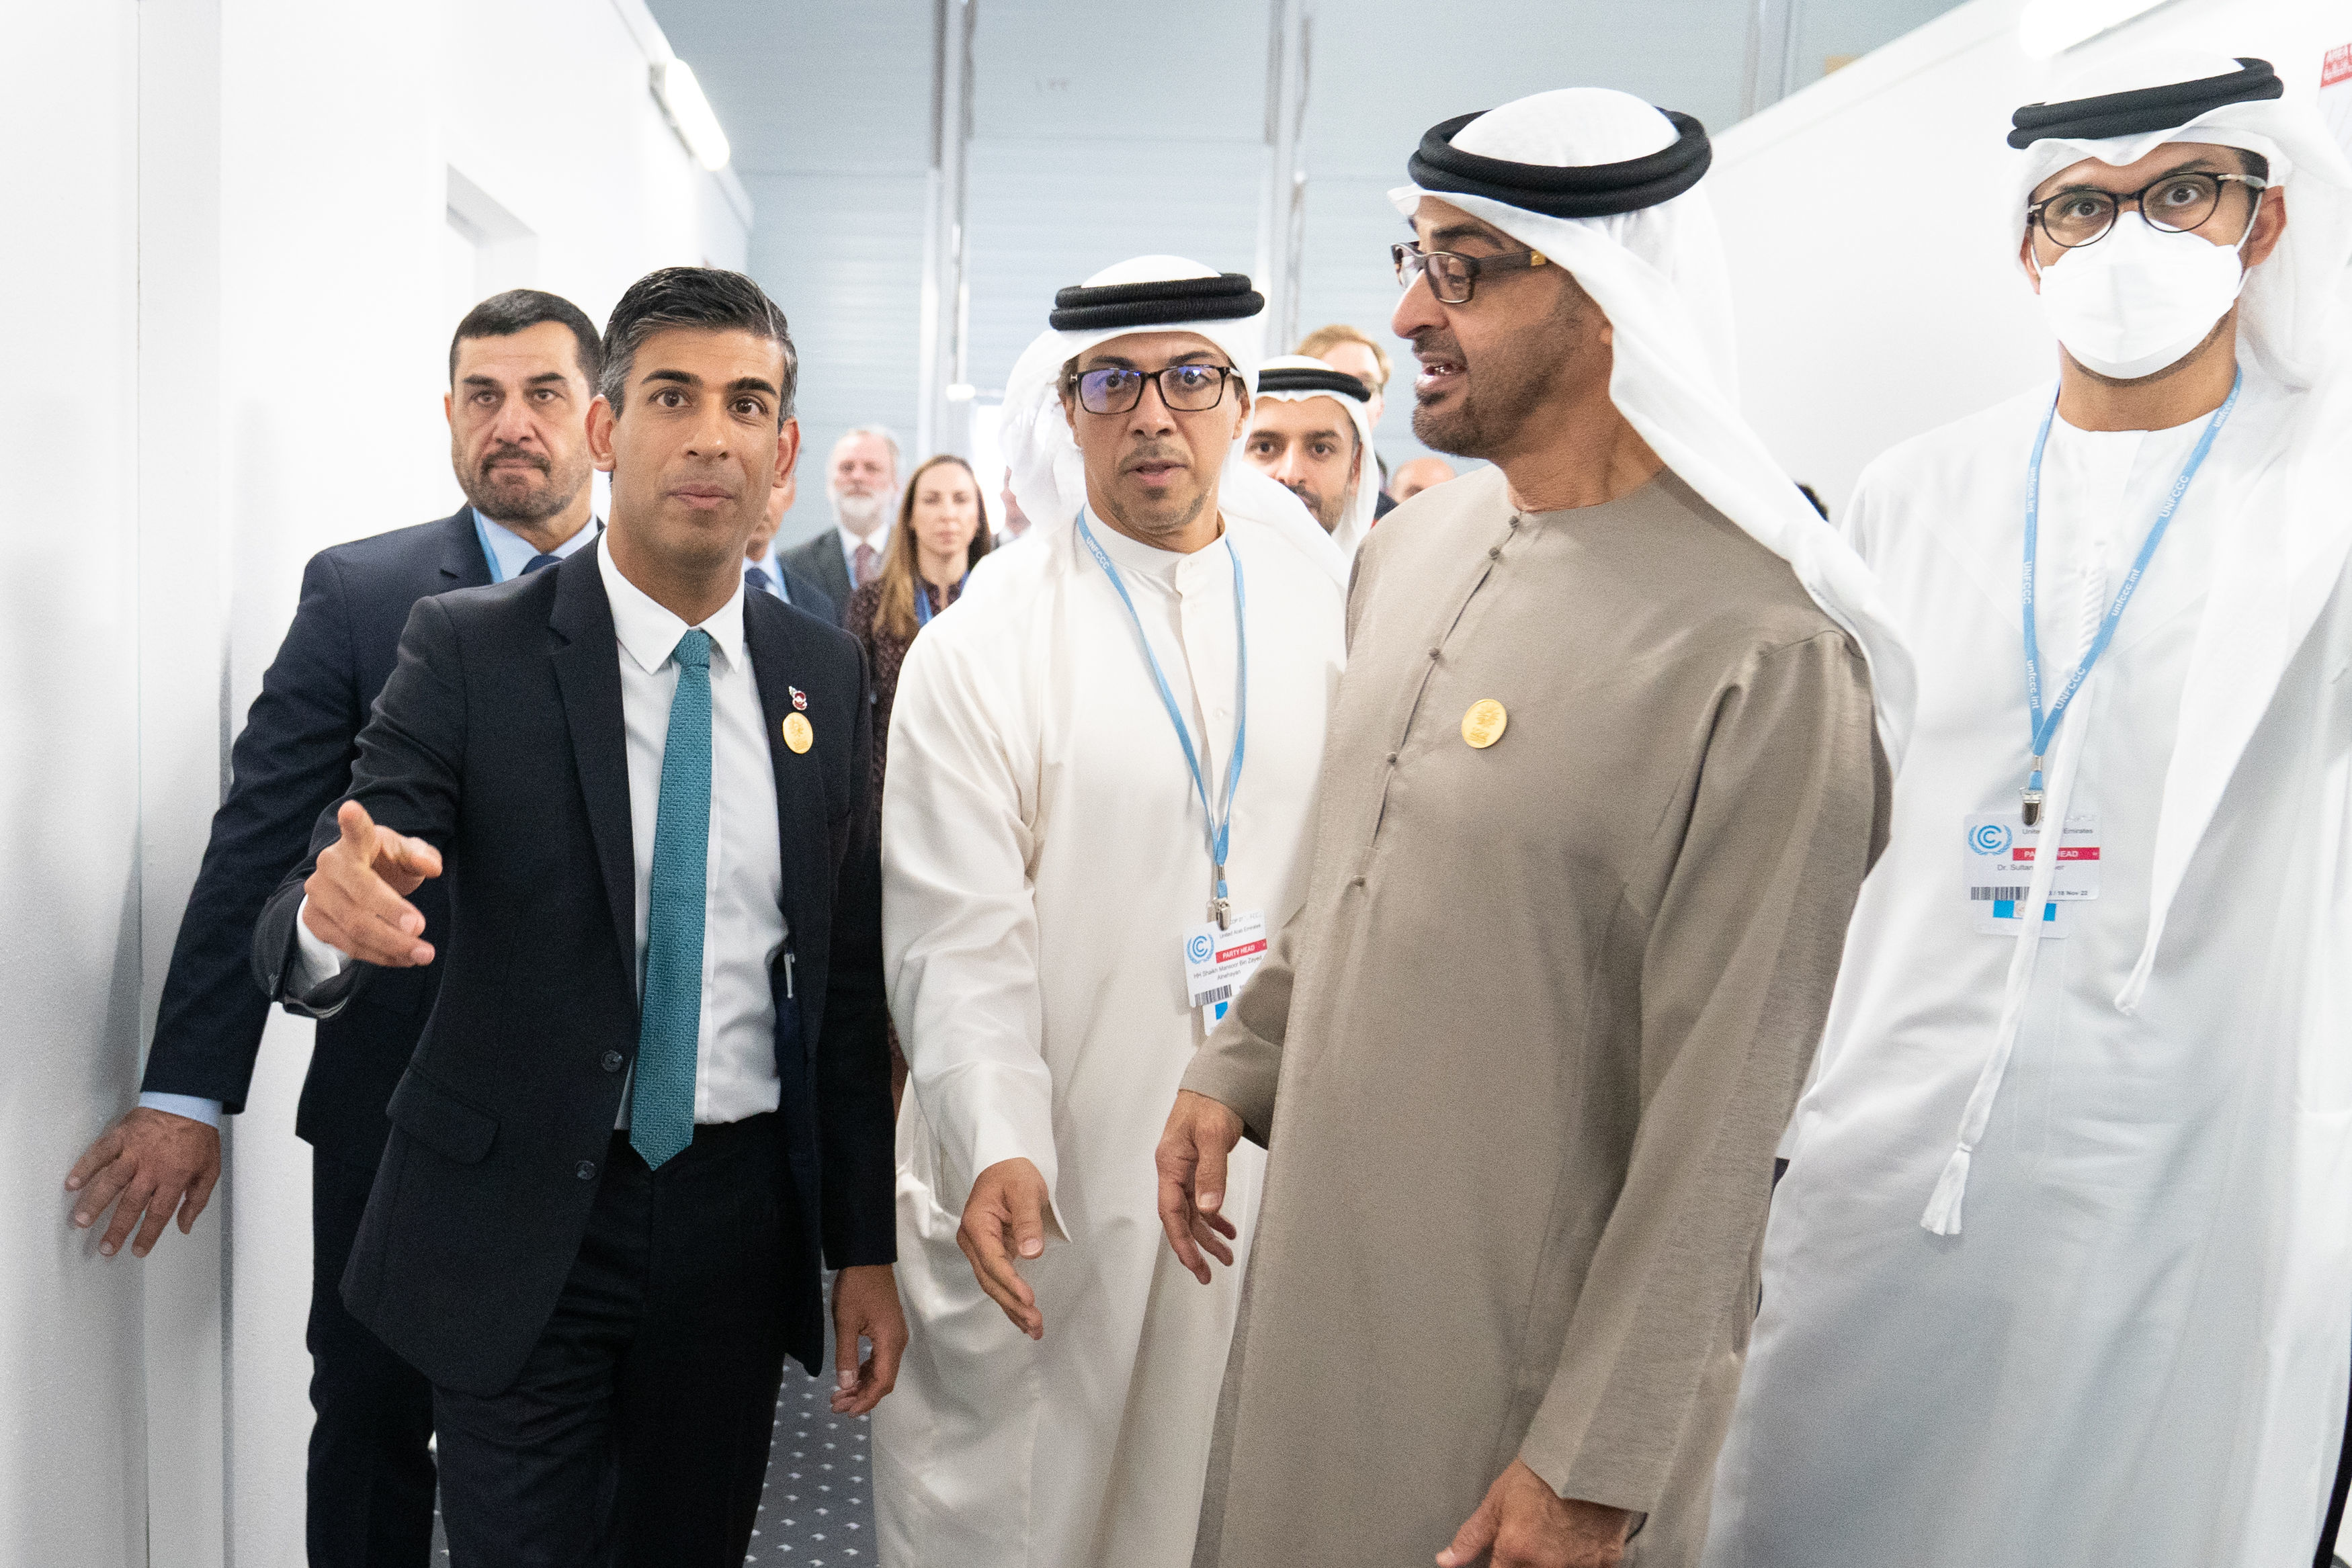 November, 2022: Rishi arrives for a meeting with Crown Prince Mohamed bin Zayed Al Nahyan of the United Arab Emirates during the Cop27 summit